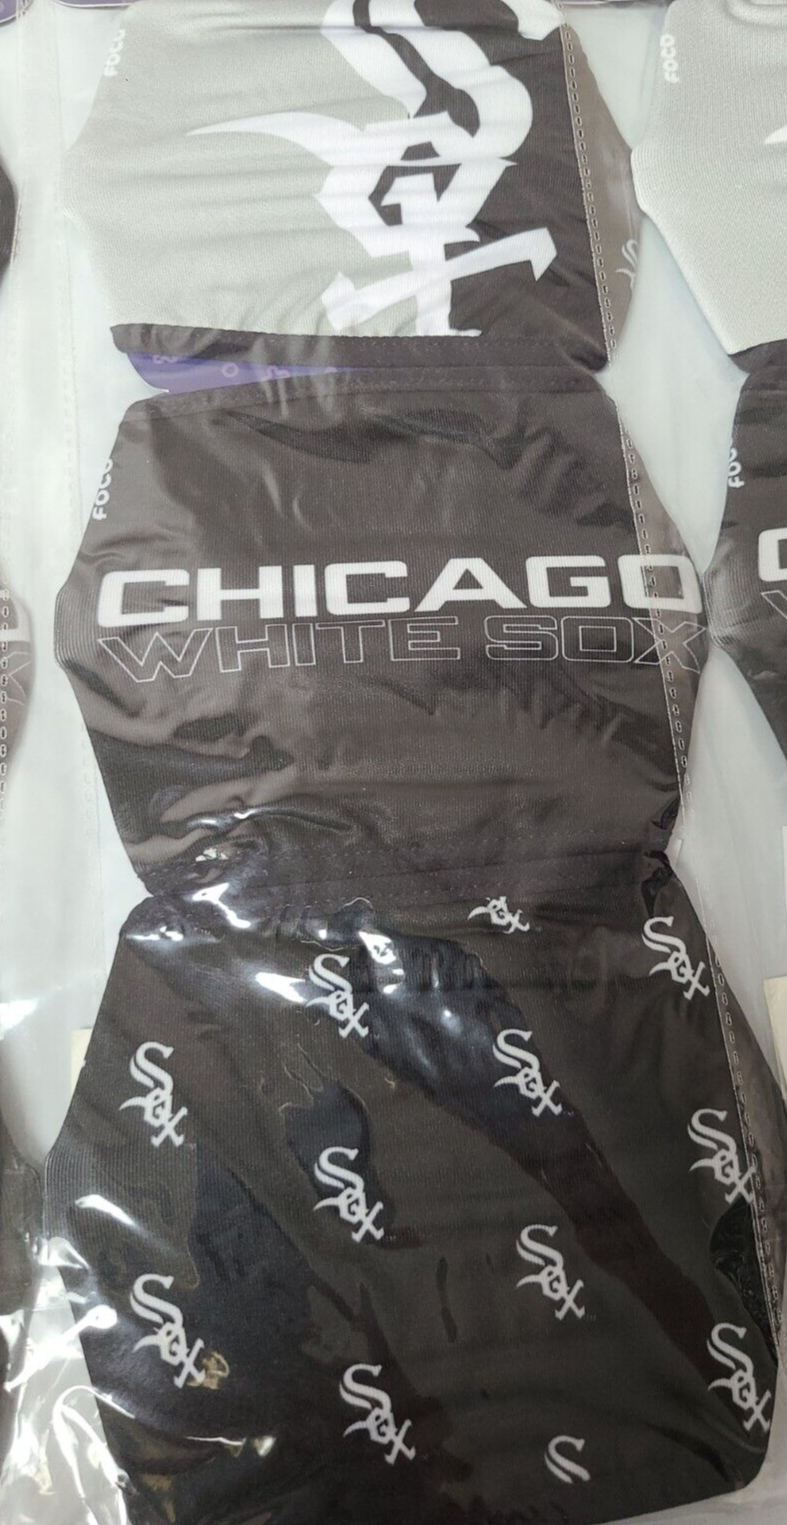 MLB Chicago White Sox Face Masks 3 Pack (Lot of 4)total 12mask FREE SHIPPING Без бренда - фотография #2